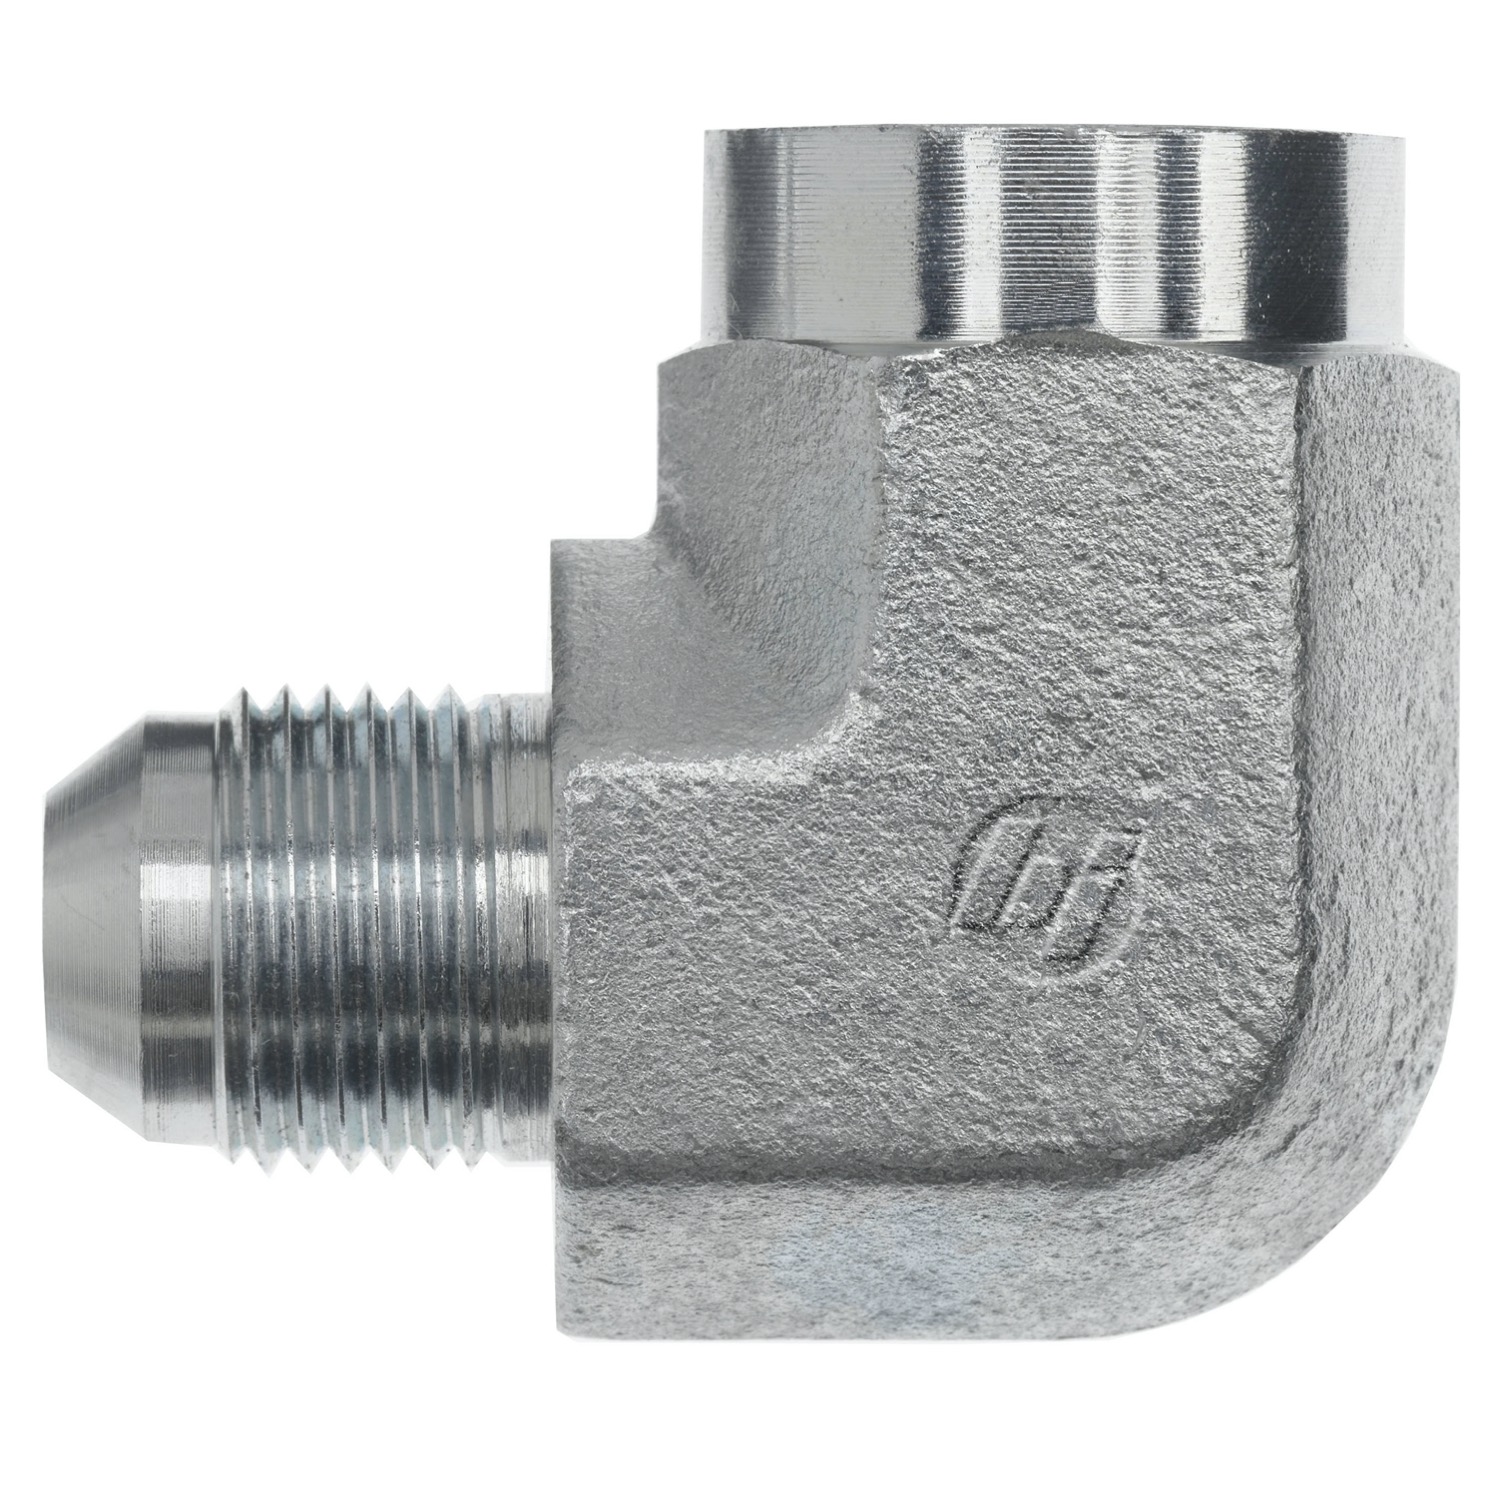 Hydraulic Hose Adapters - Elbow 90° Fitting, JIC 37° Flare to NPTF- 2502 Series 2502-06-02-FG